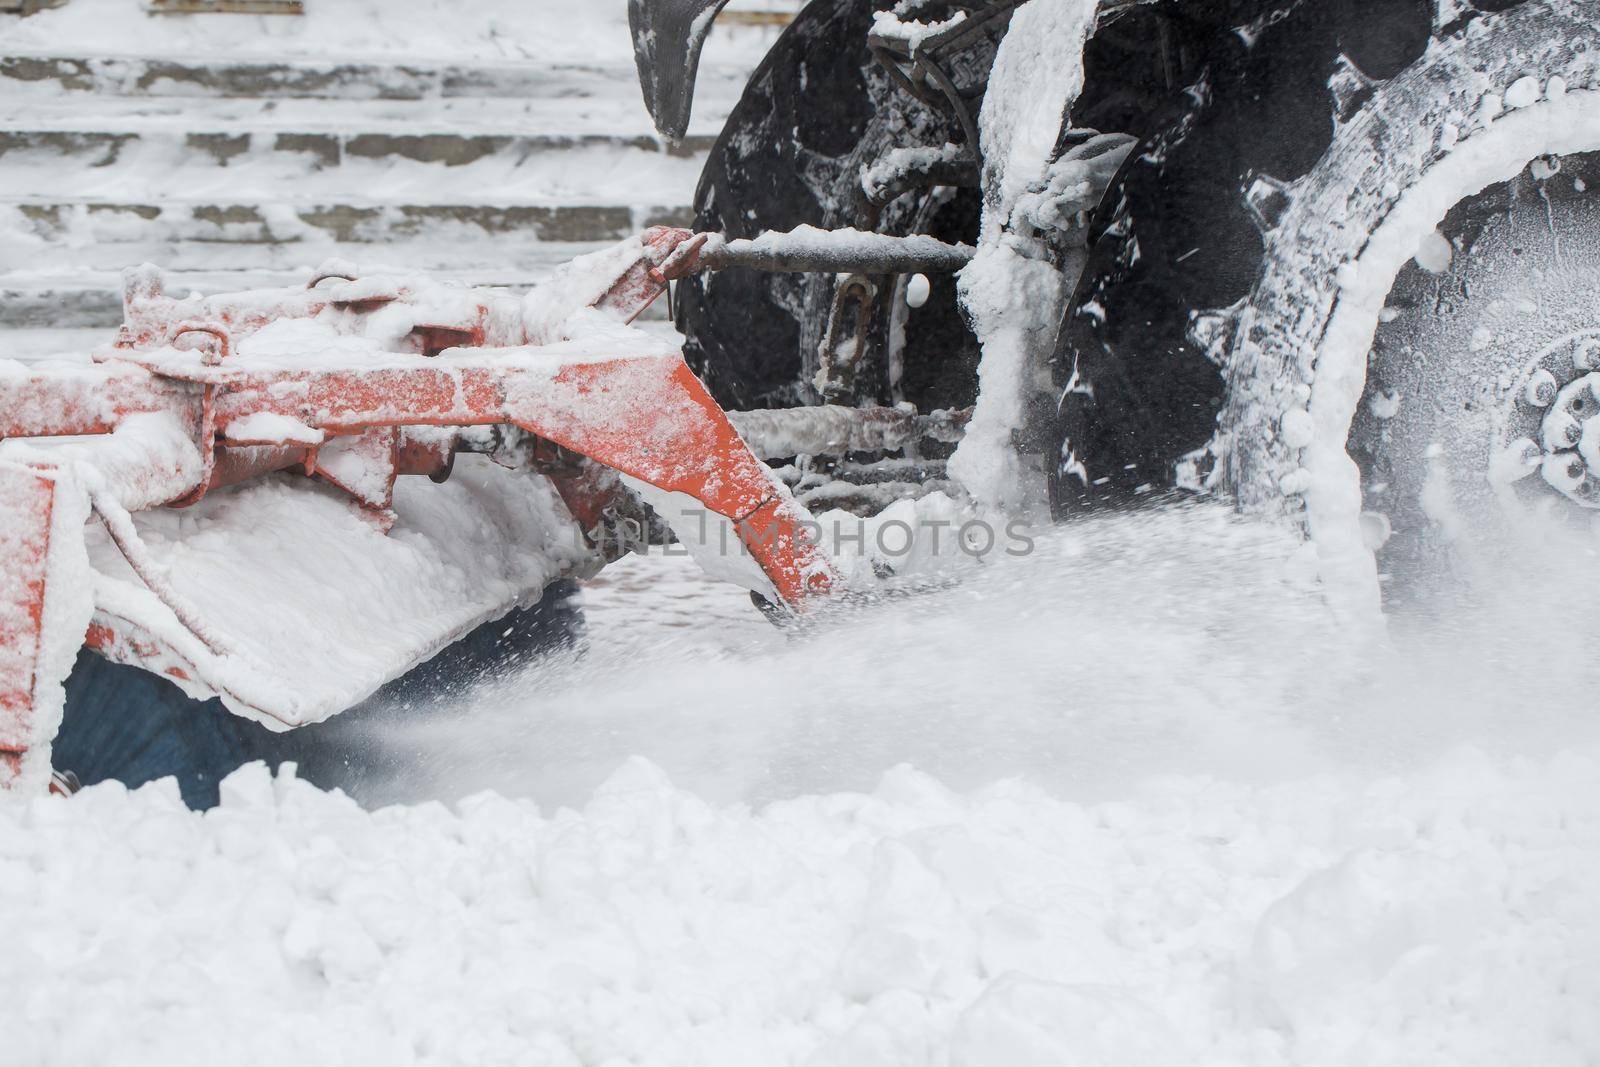 Rotating brush mounted on tractor to clean streets from snow closeup. Sweeping and cleaning sidewalk in winter. Tractor clean street from snow and ice from walkway after blizzard. by StudioPeace